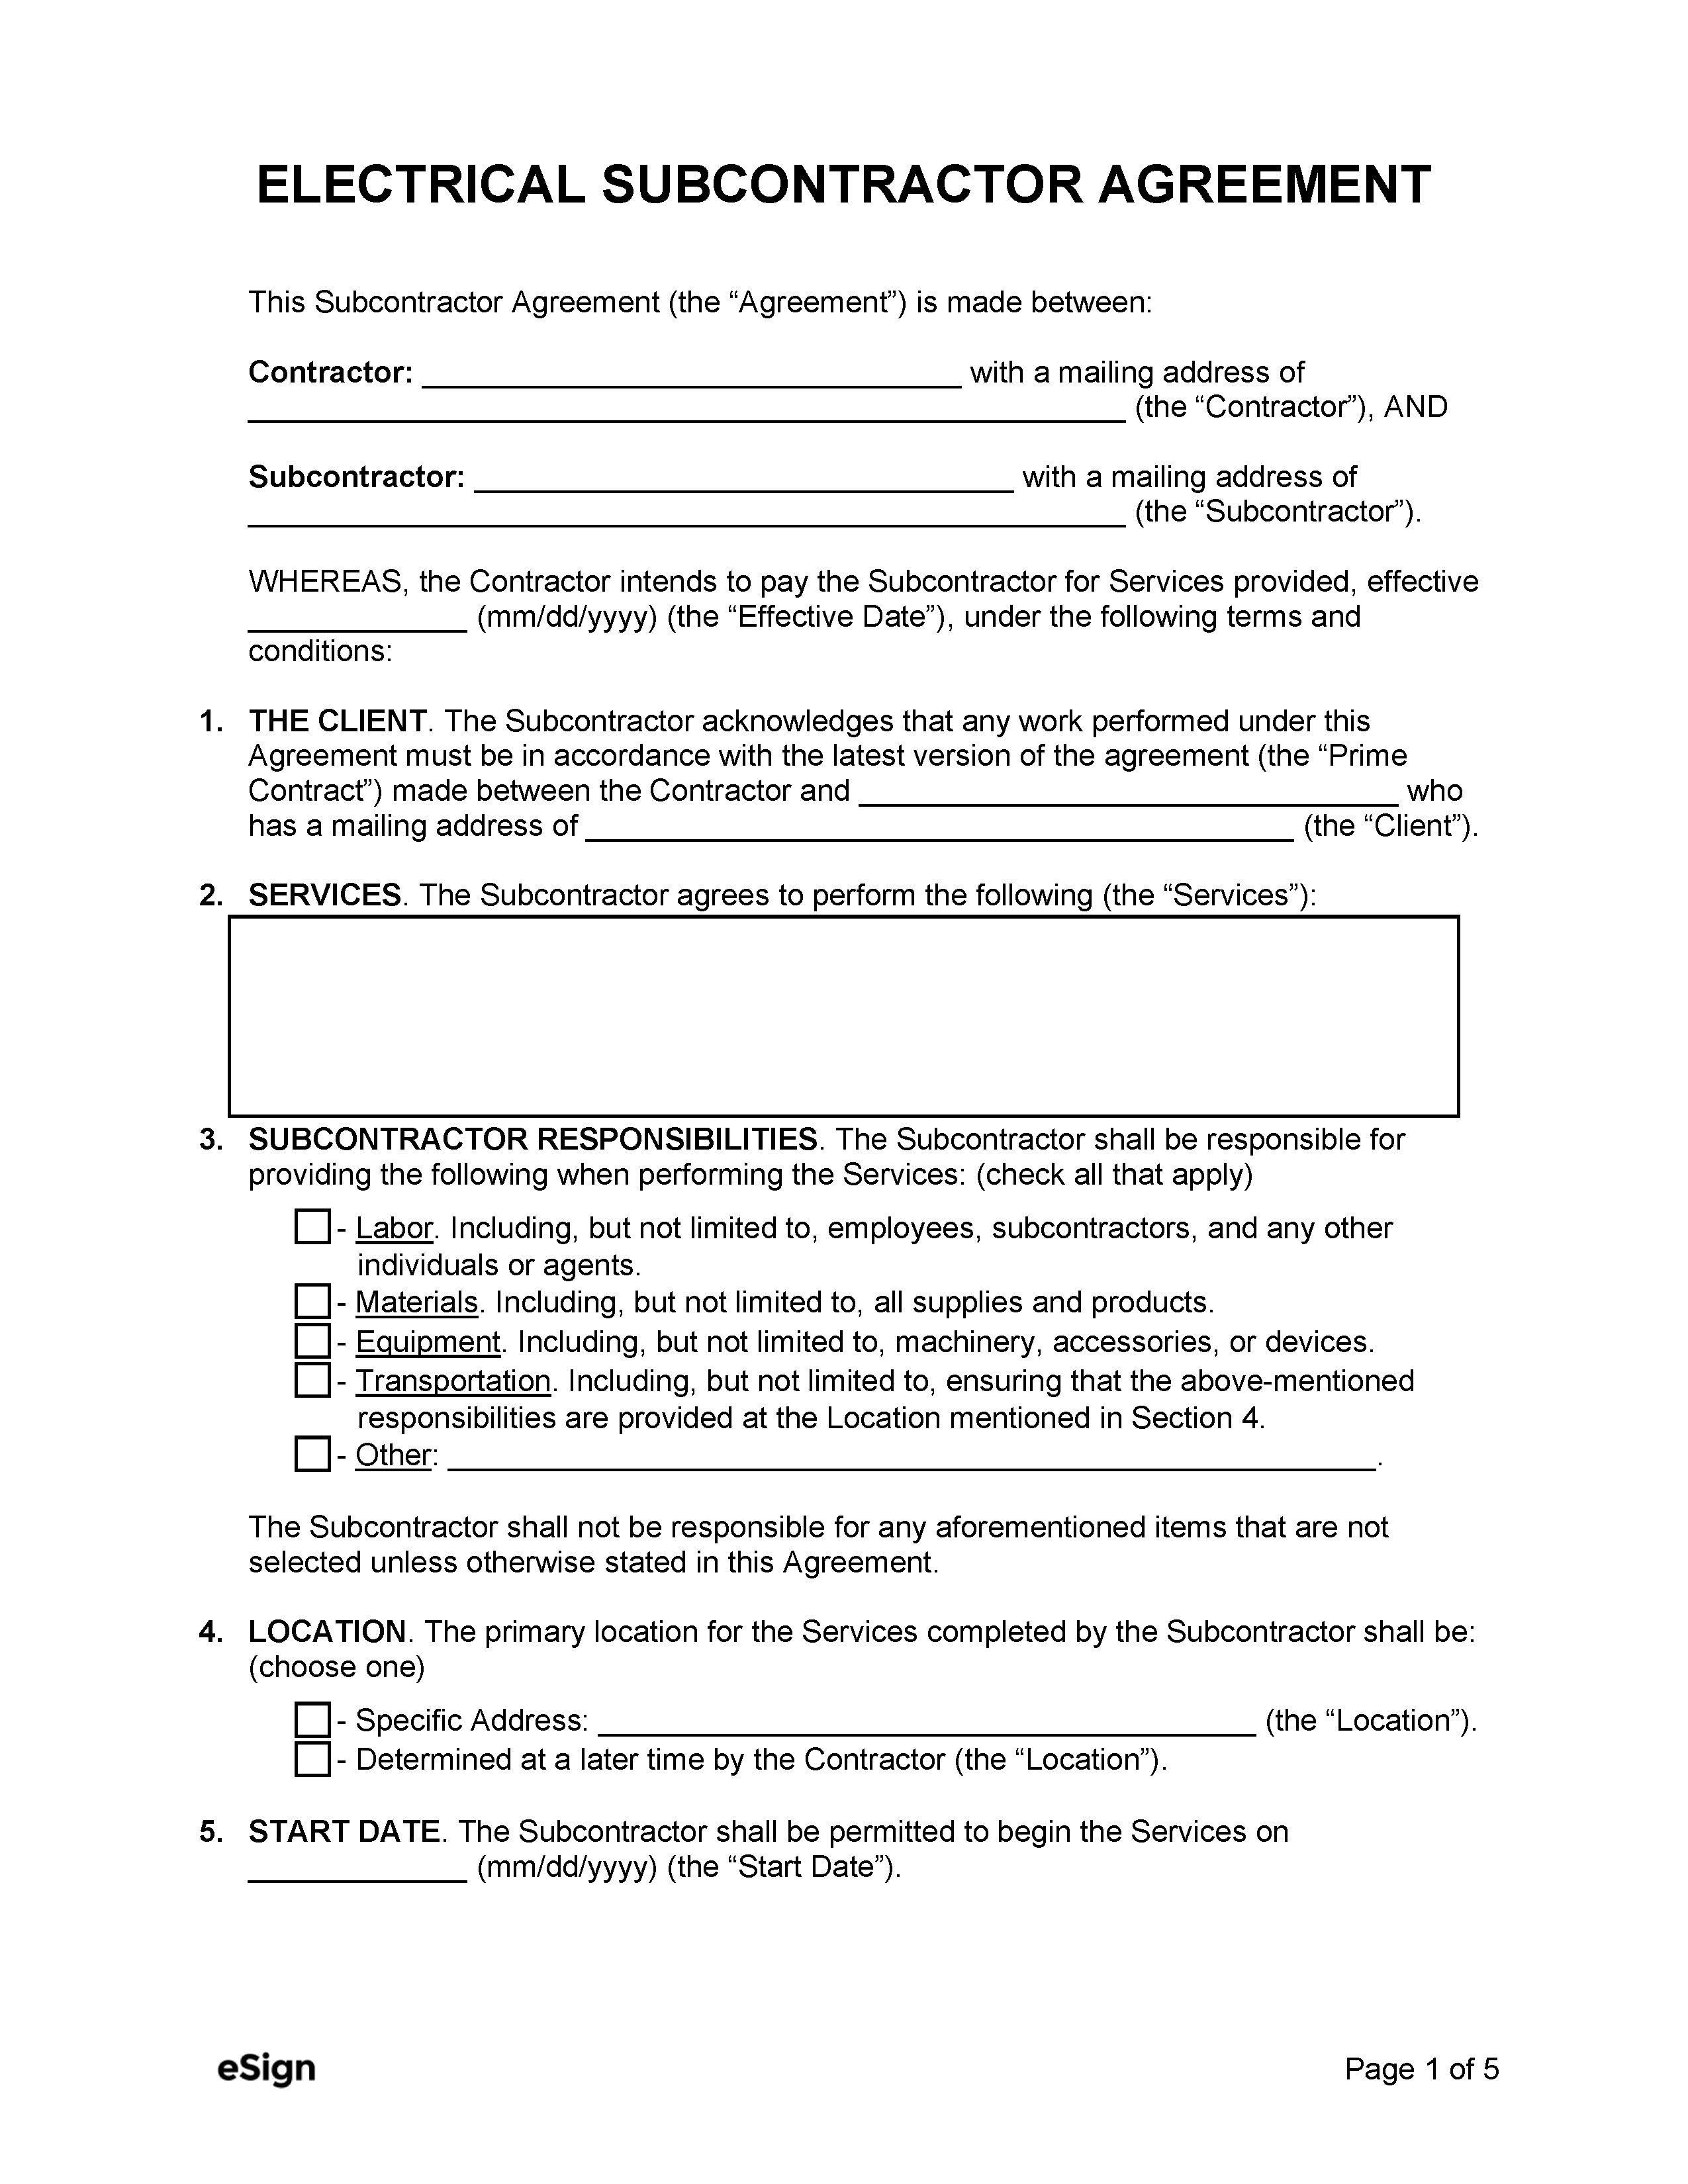 free-electrical-subcontractor-agreement-template-pdf-word